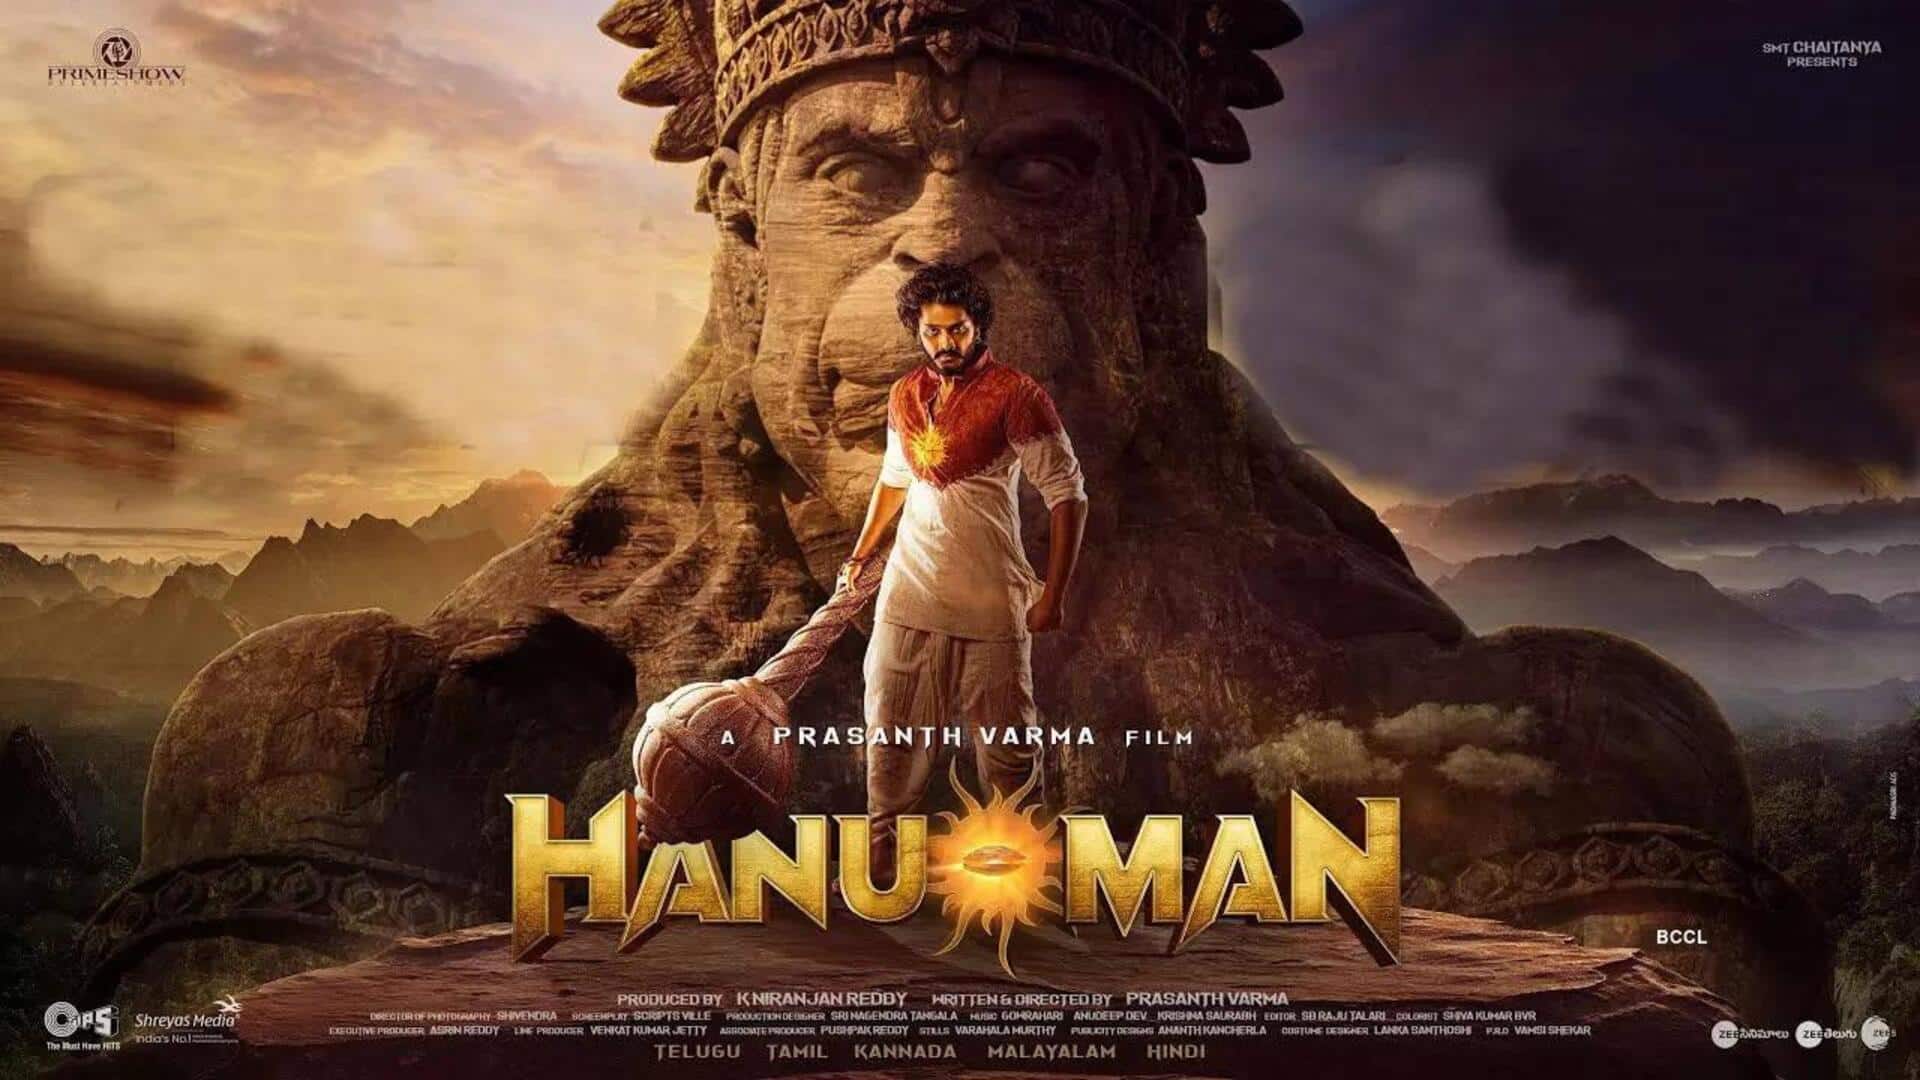 Box office collection: 'Hanu-Man' aims for commercial boost